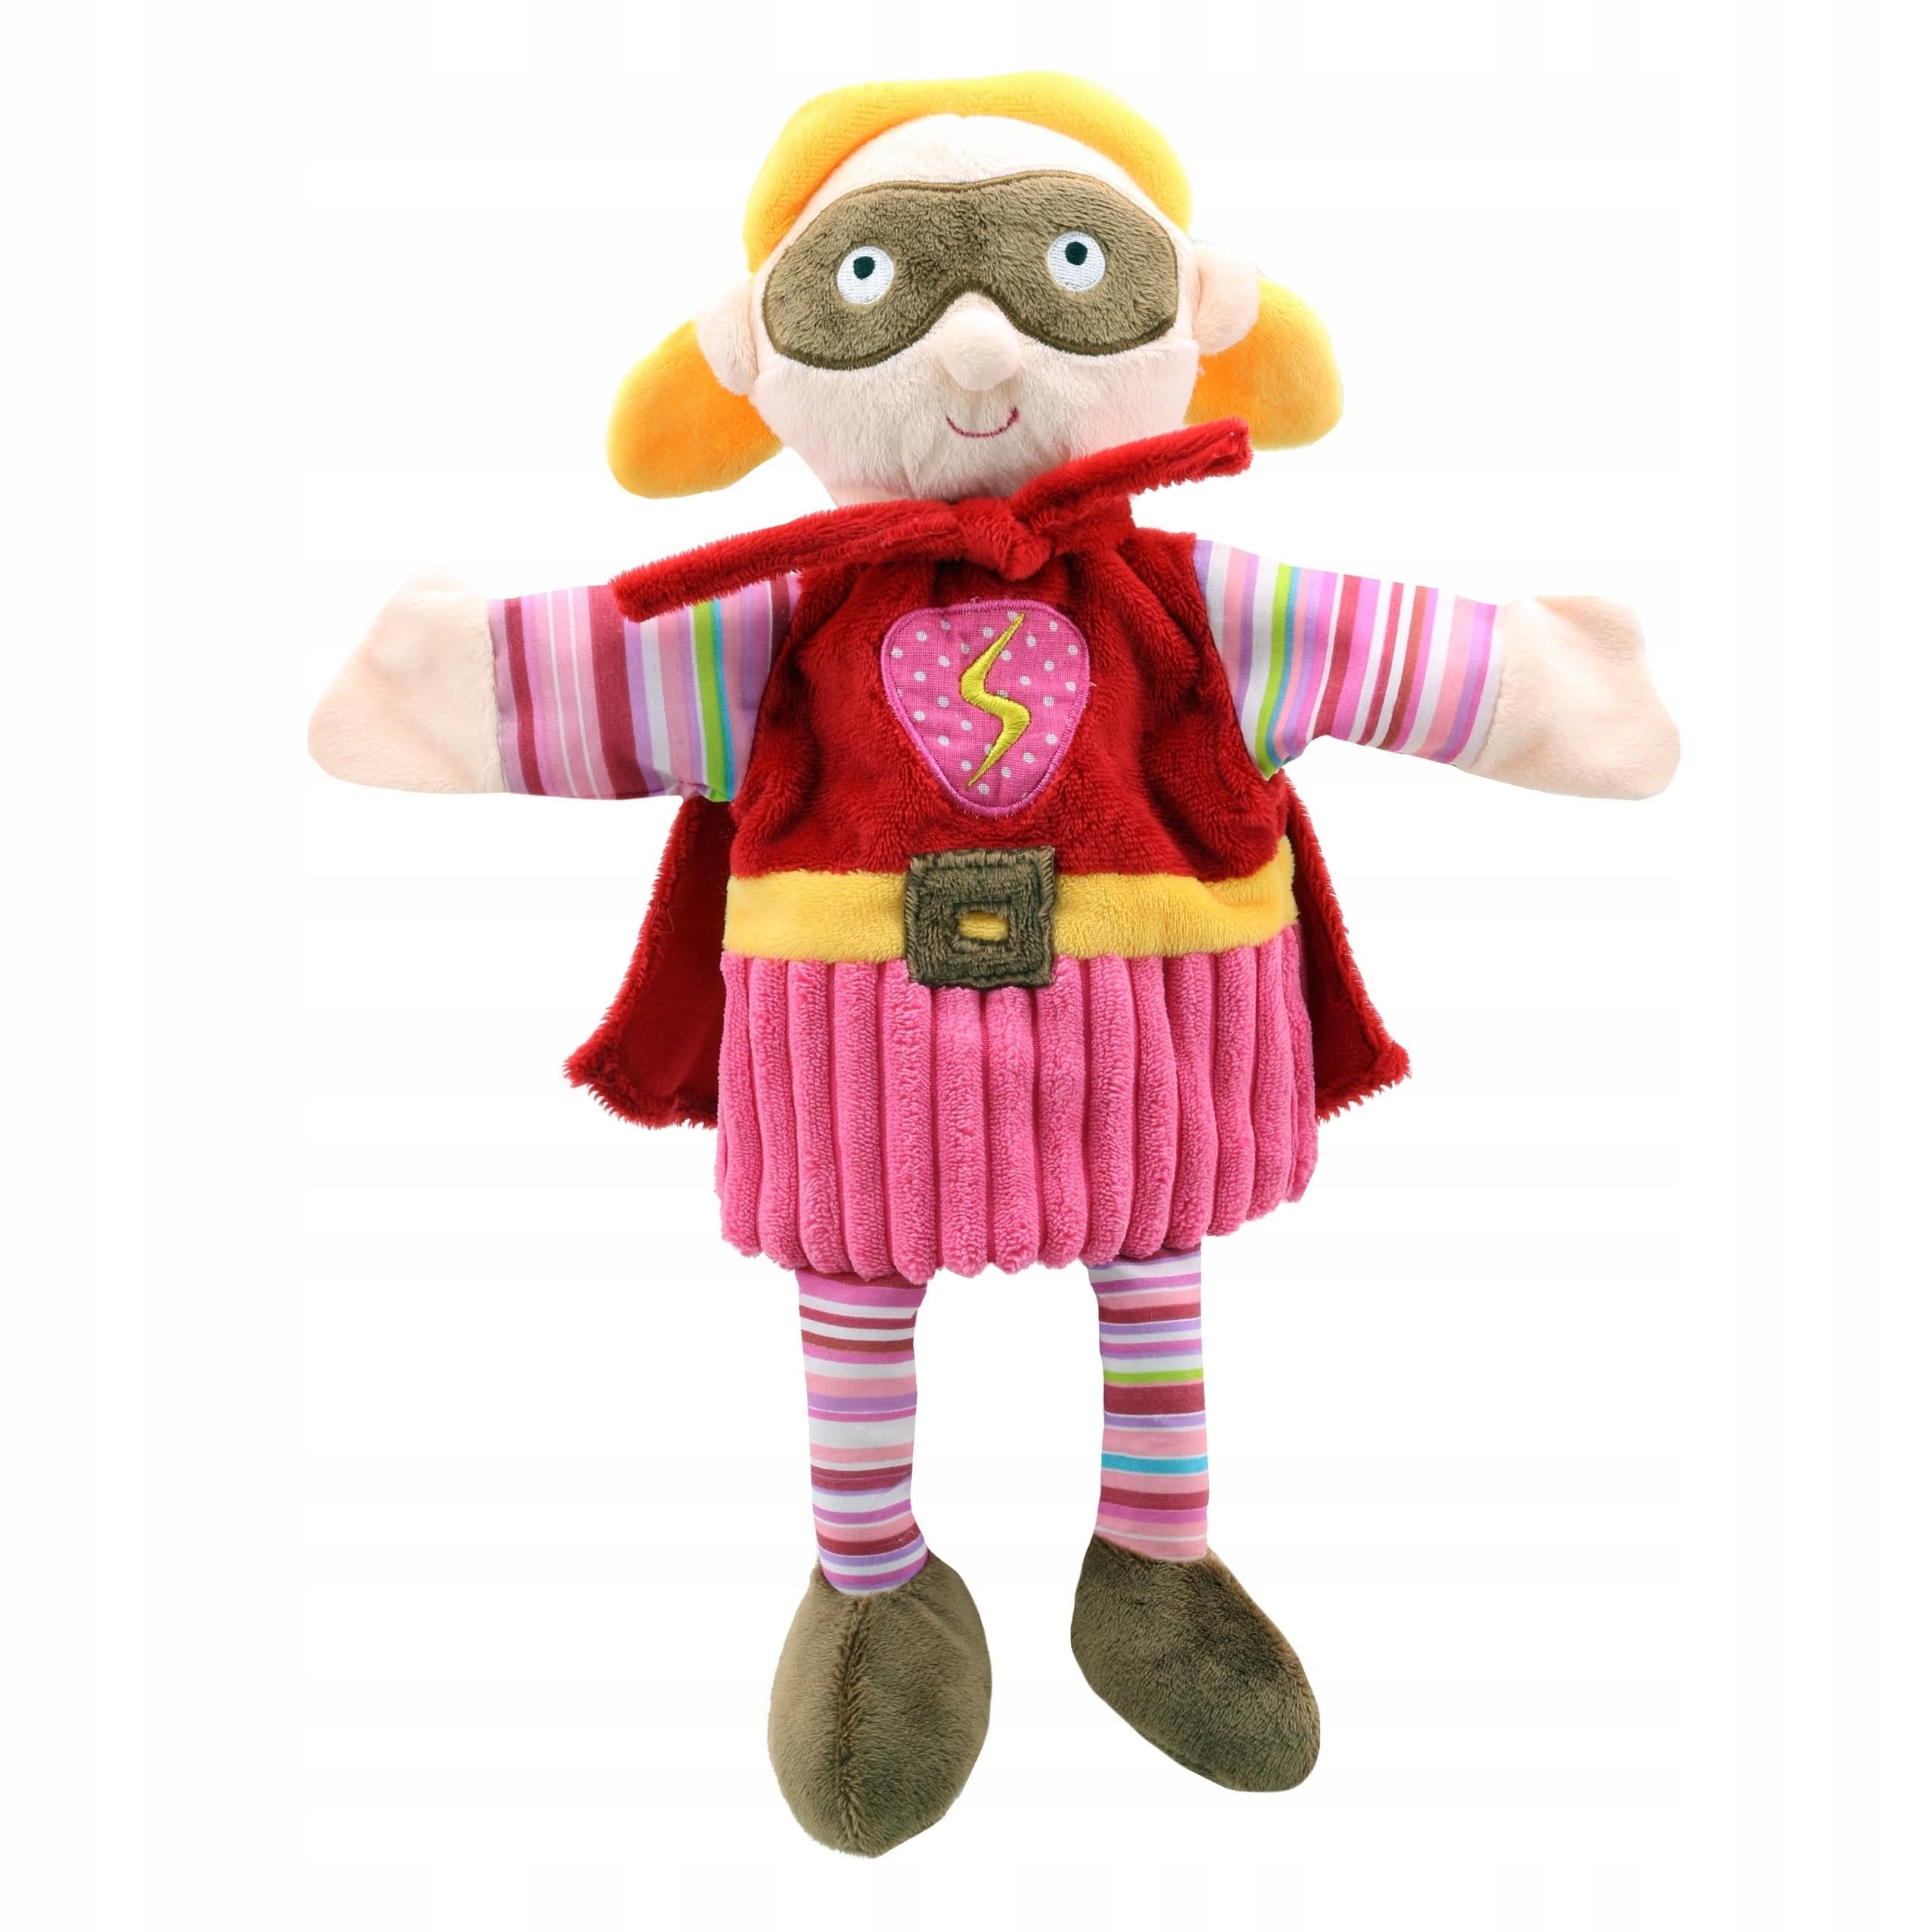 The Puppet Company - Story Tellers - Super Hero (Pink) Hand Puppet, 15